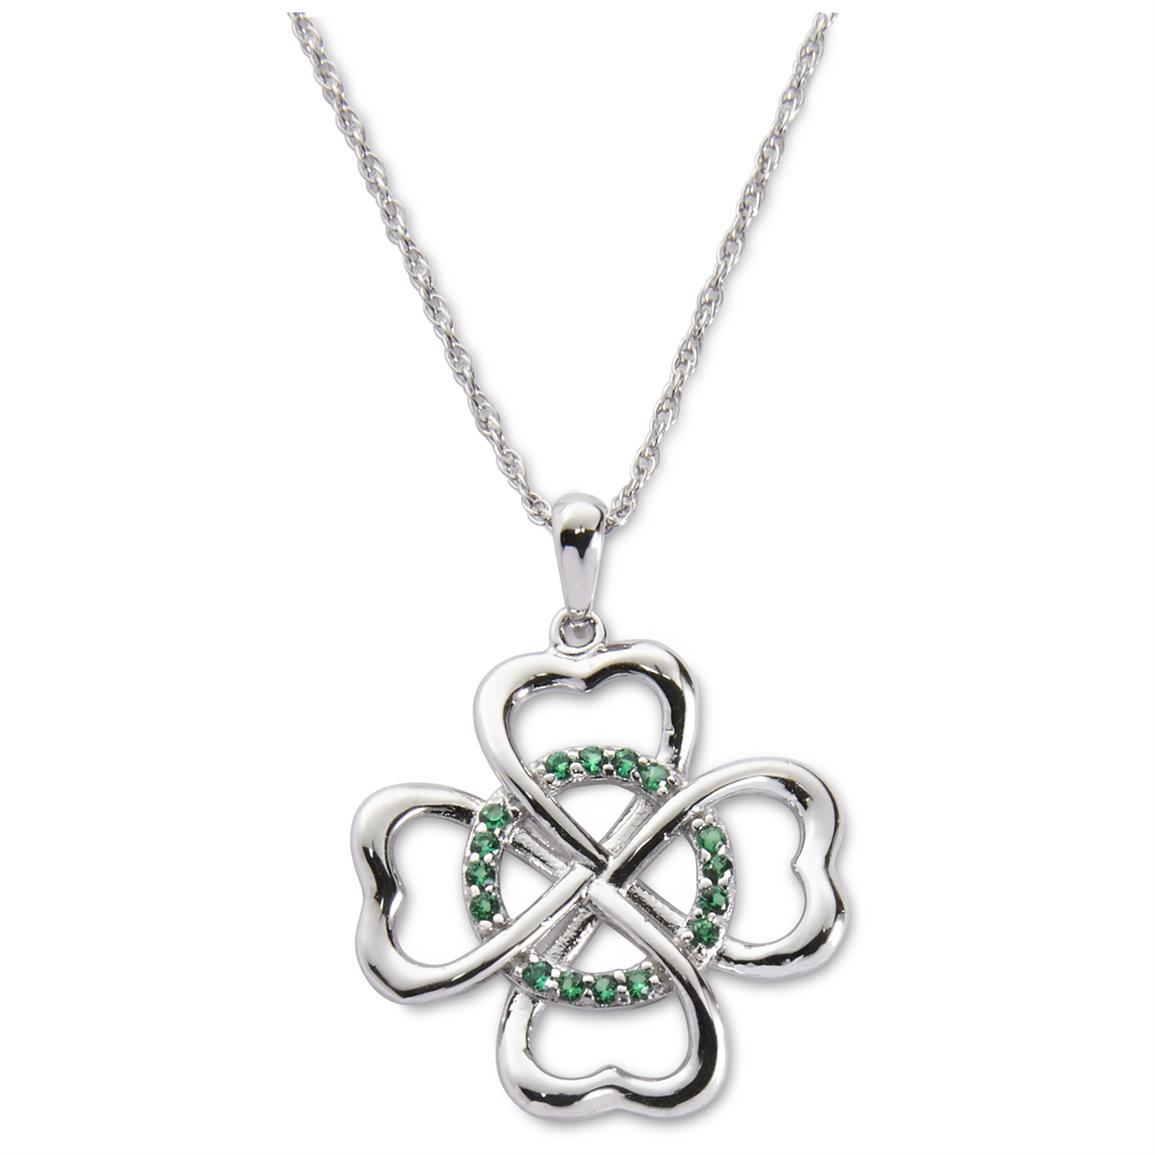 4-leaf Clover Emerald Pendant - 654012, Jewelry at ...